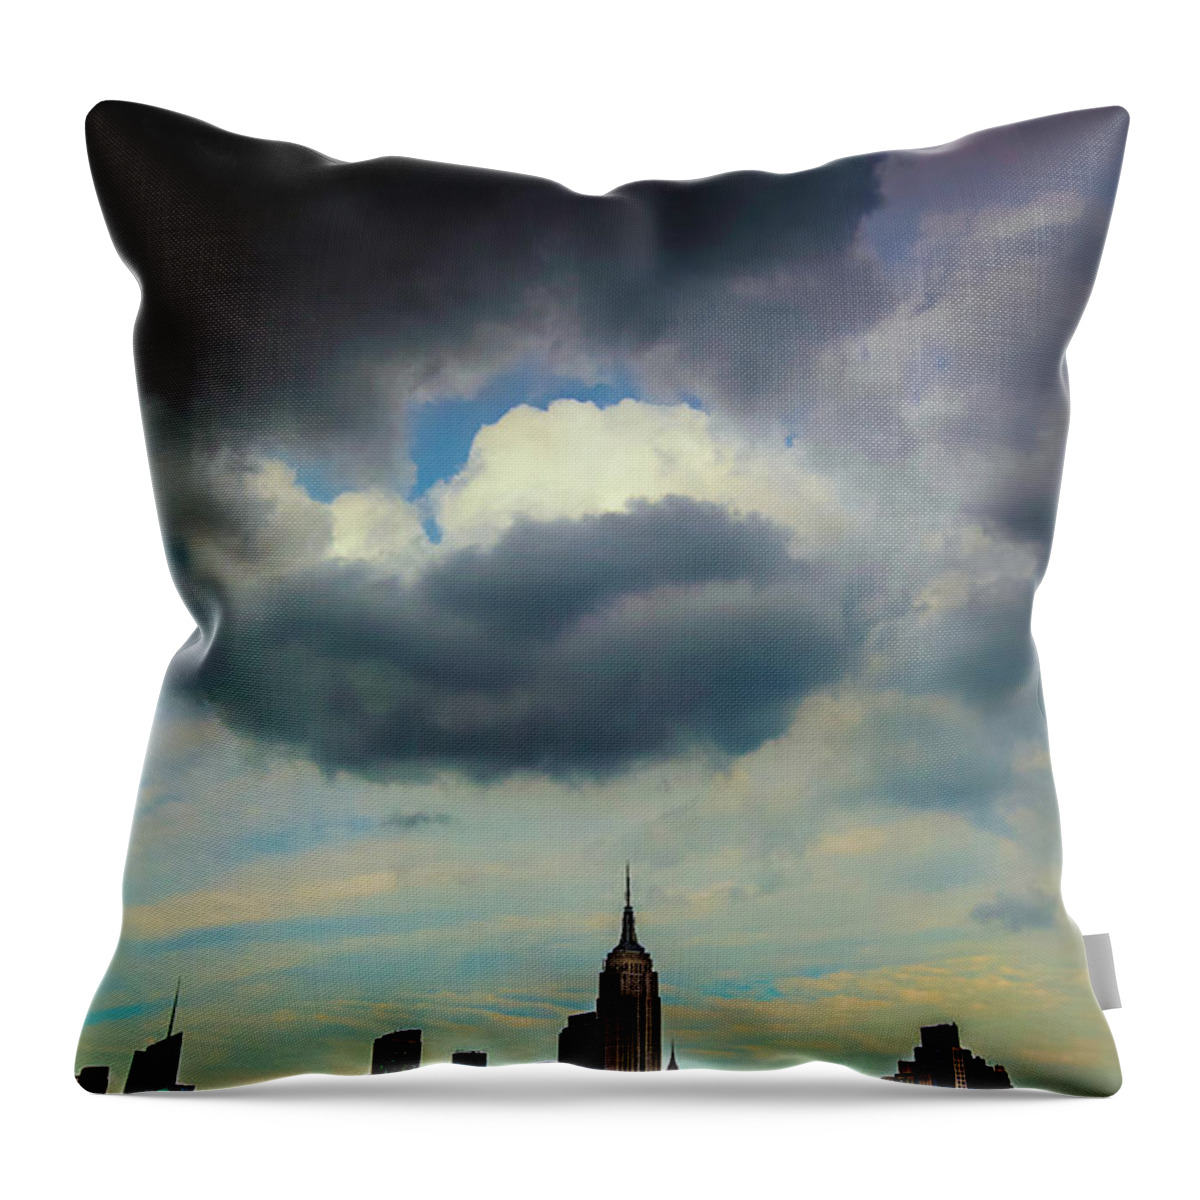 Built Structure Throw Pillow featuring the photograph The View From Google Nyc Headquarters by Photo By Alan Shapiro